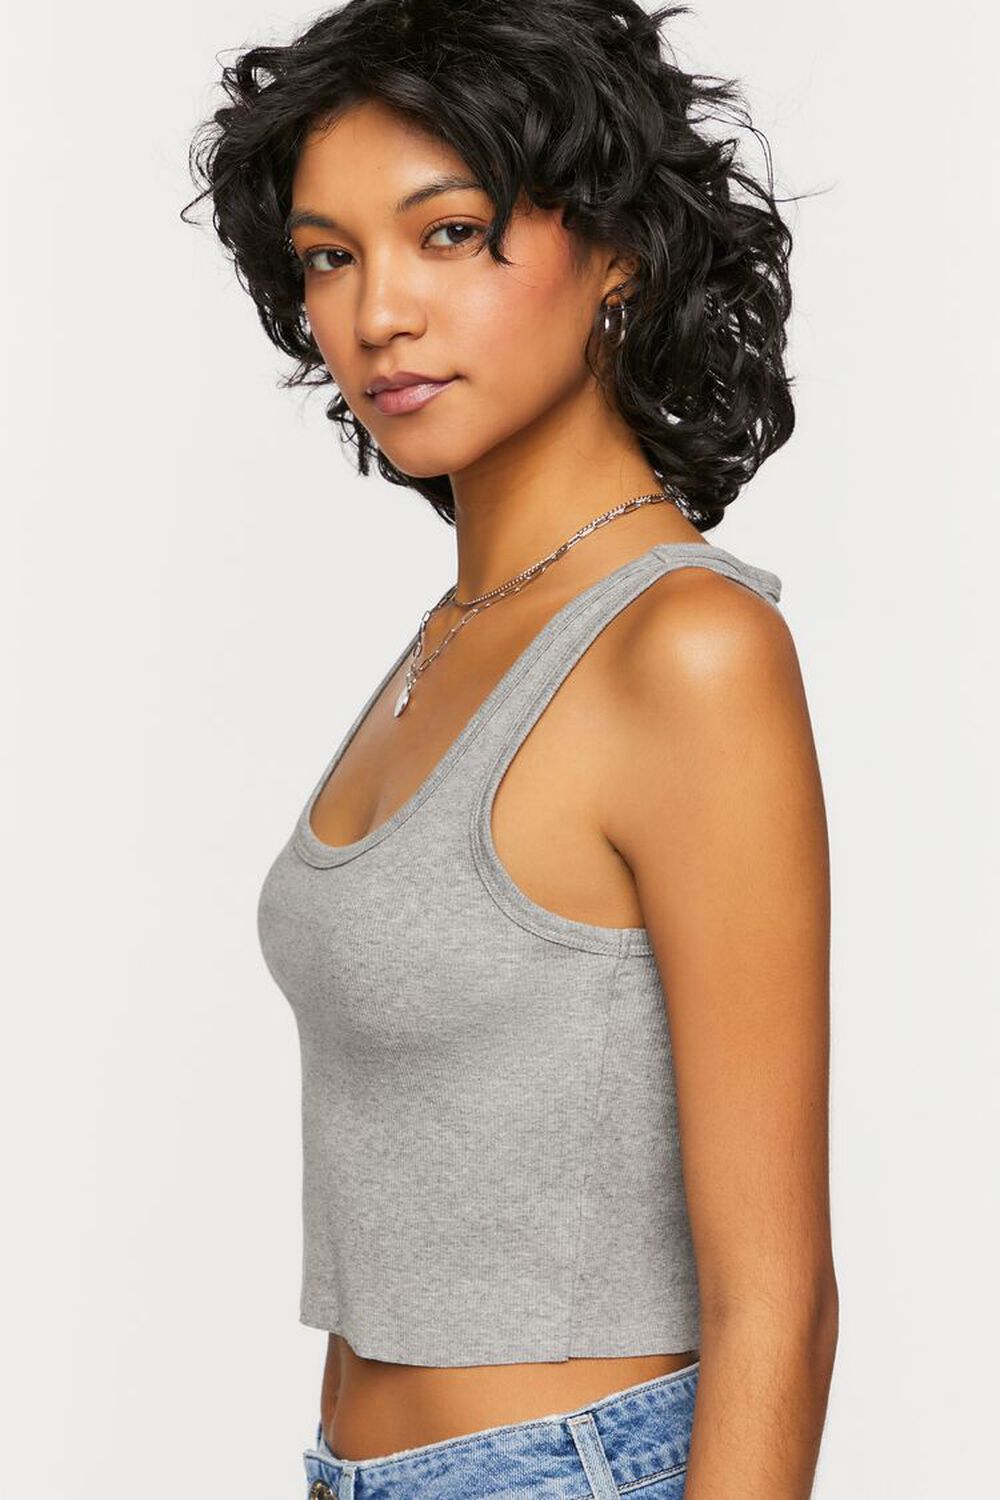 HEATHER GREY Cropped Tank Top, image 2